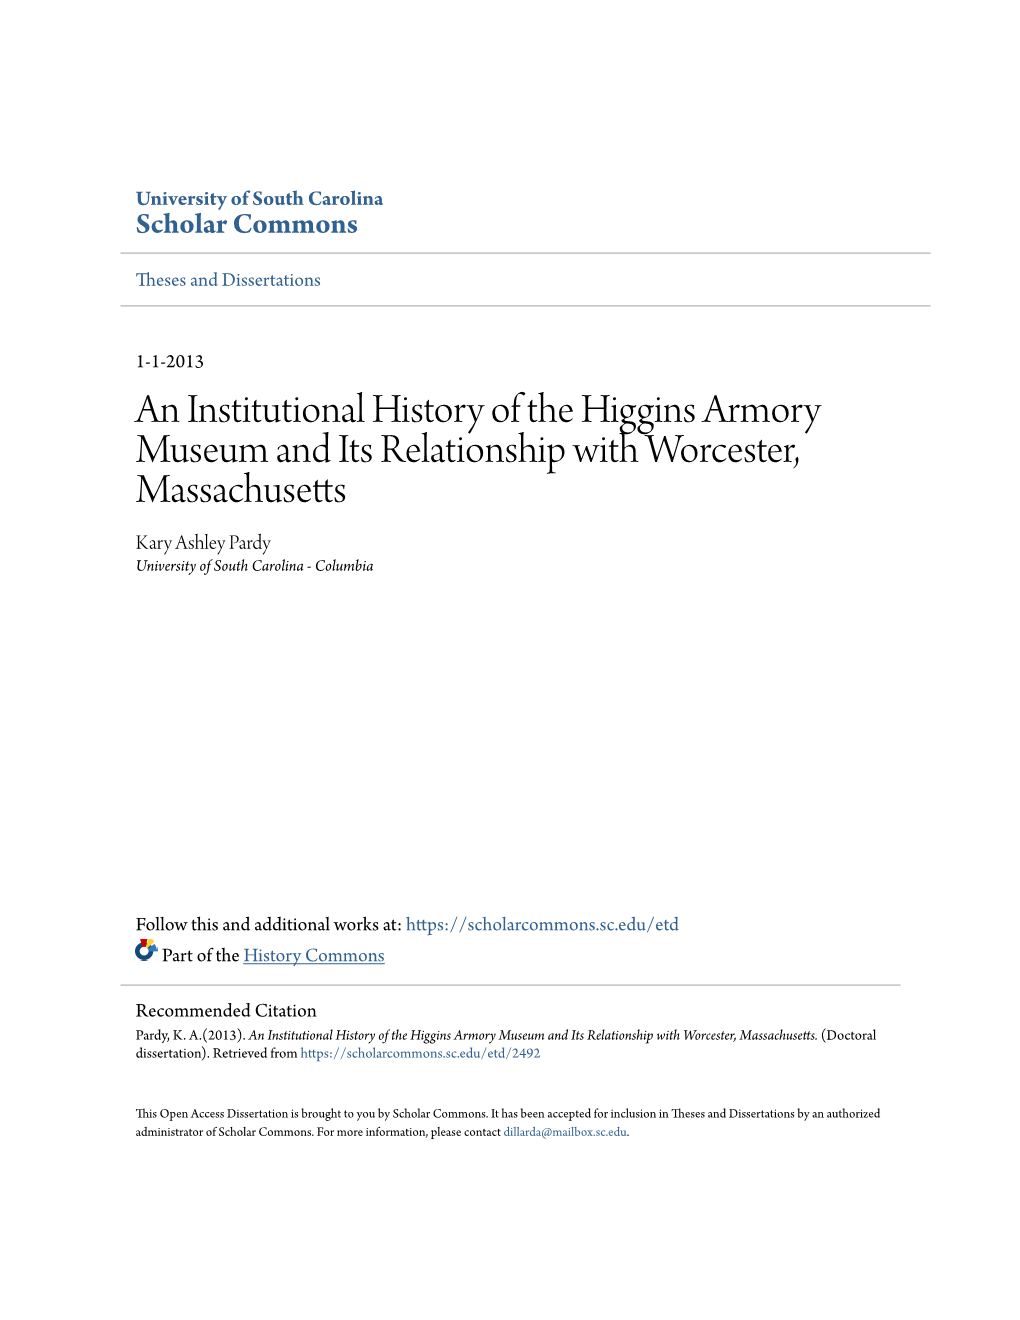 An Institutional History of the Higgins Armory Museum and Its Relationship with Worcester, Massachusetts Kary Ashley Pardy University of South Carolina - Columbia